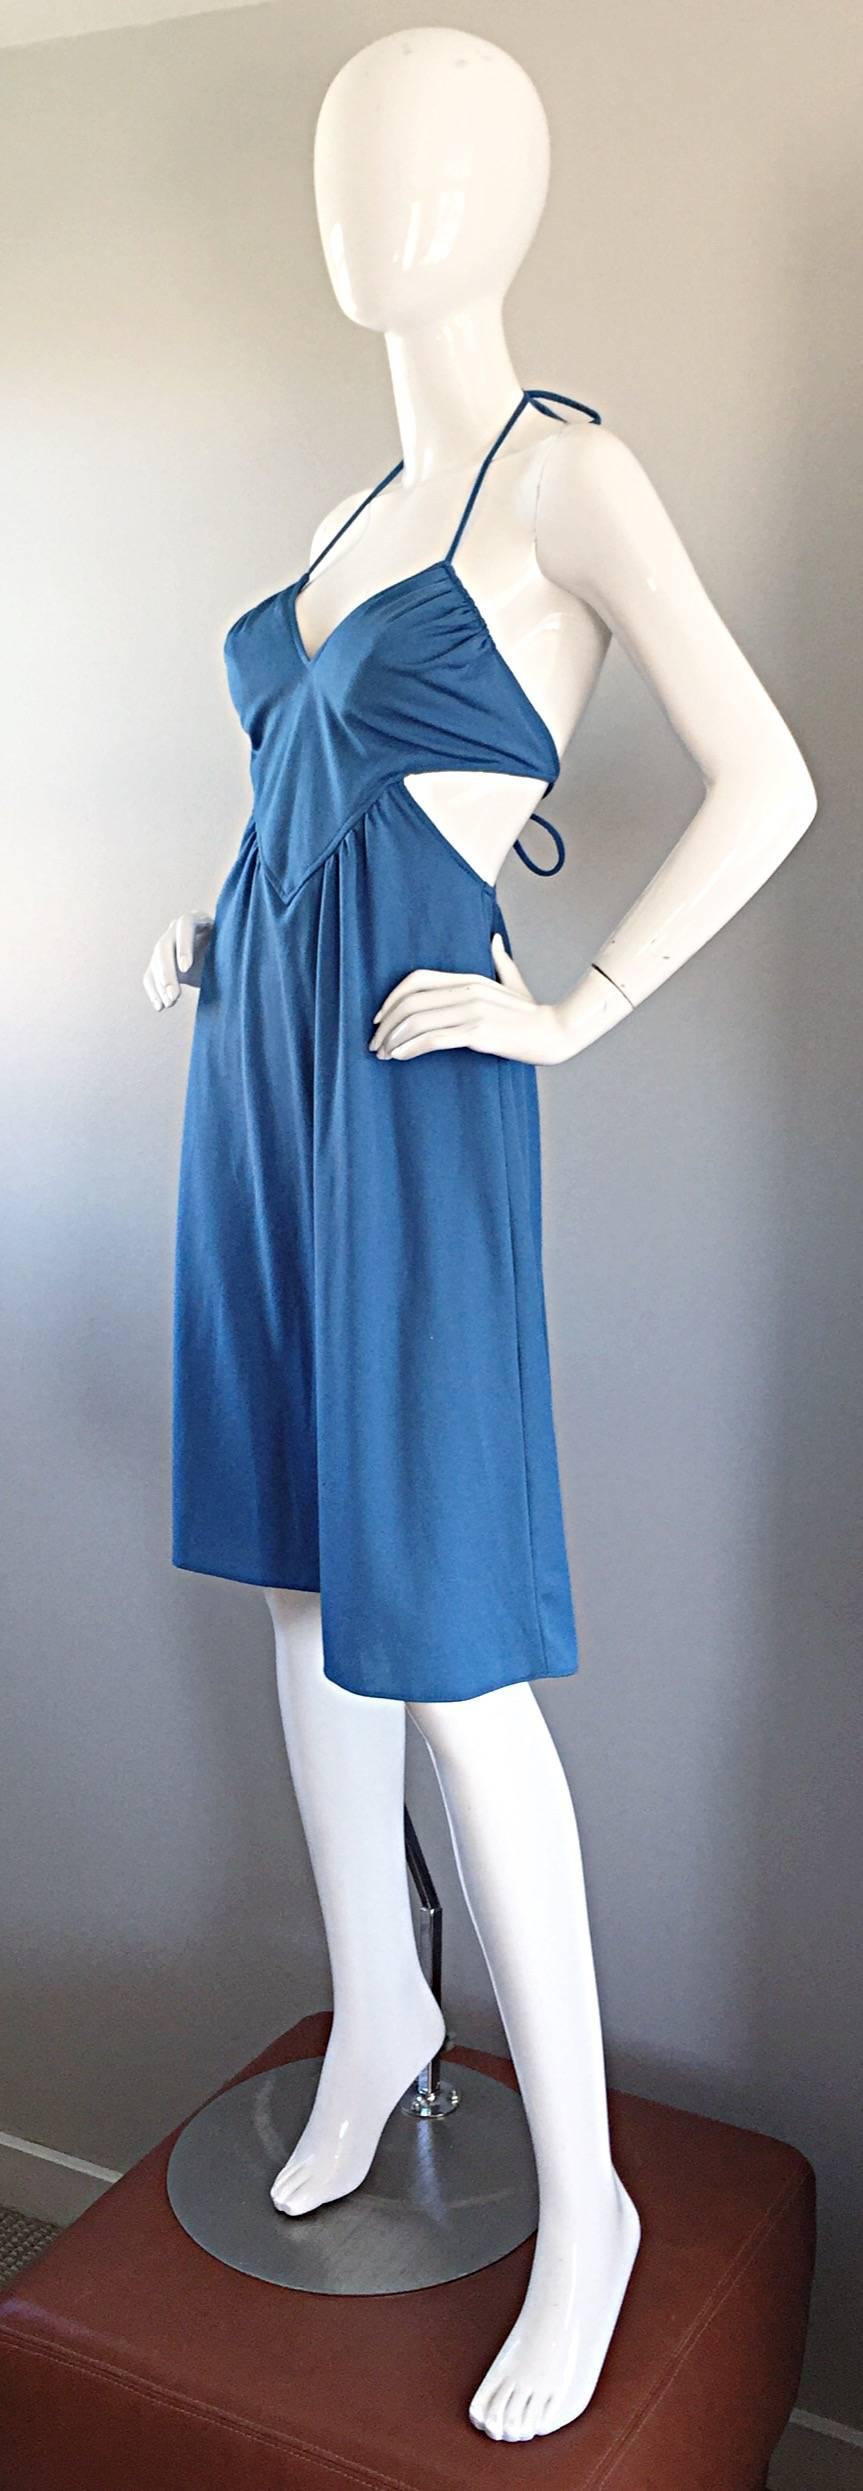 Sexy vintage 70s SAMIR robins egg blue cut-out dress! So much detail on this stretch jersey beauty! Heart shaped bust, with cut-out on each side of the waist. Ties at the back halter neck, and above the back waist. Looks amazing on, and can easily